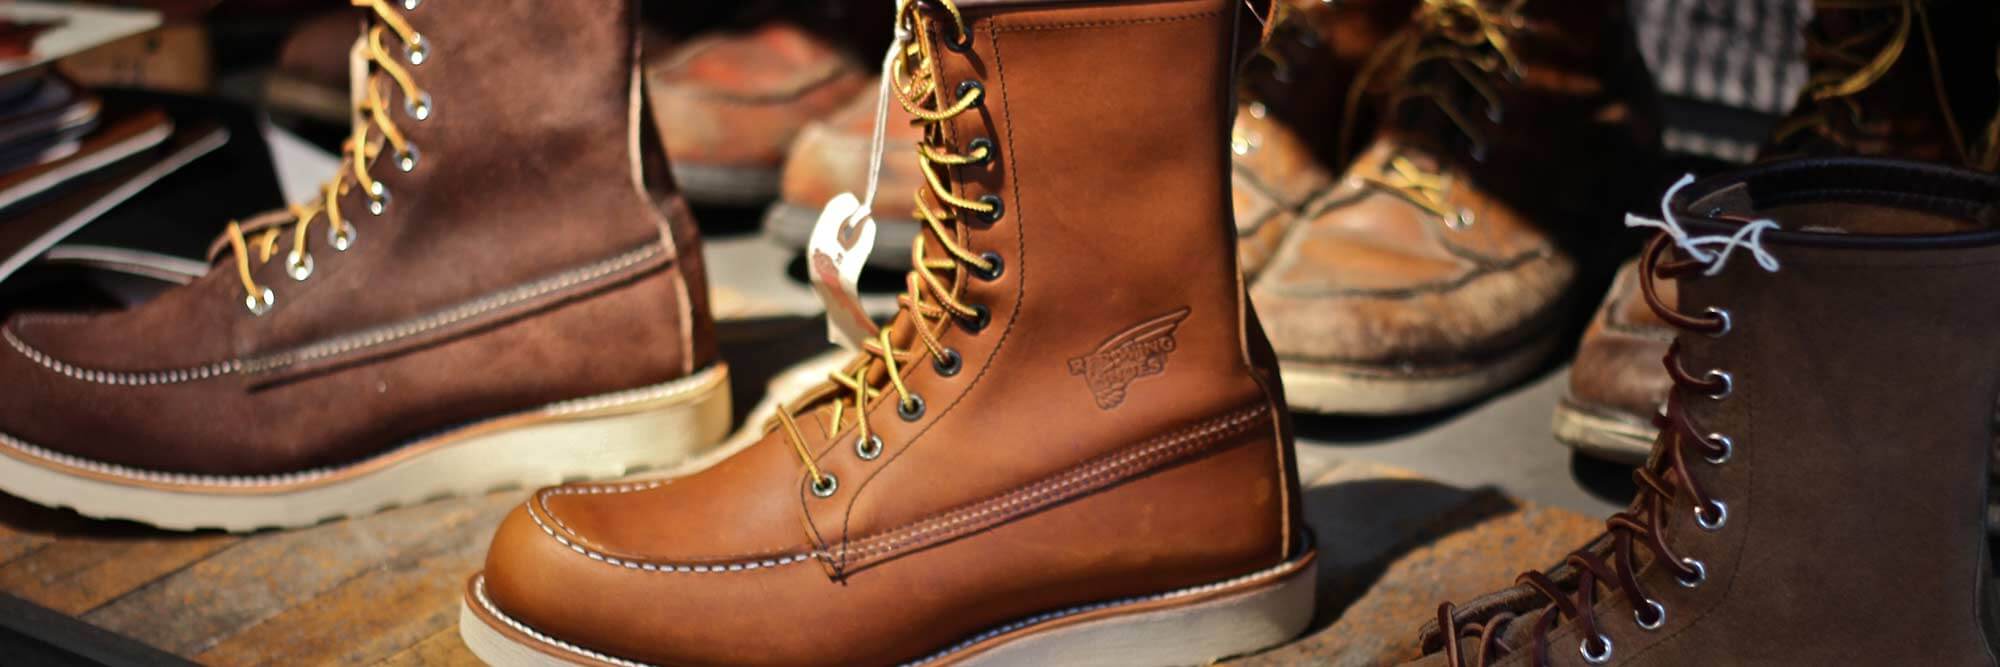 redwing-boots